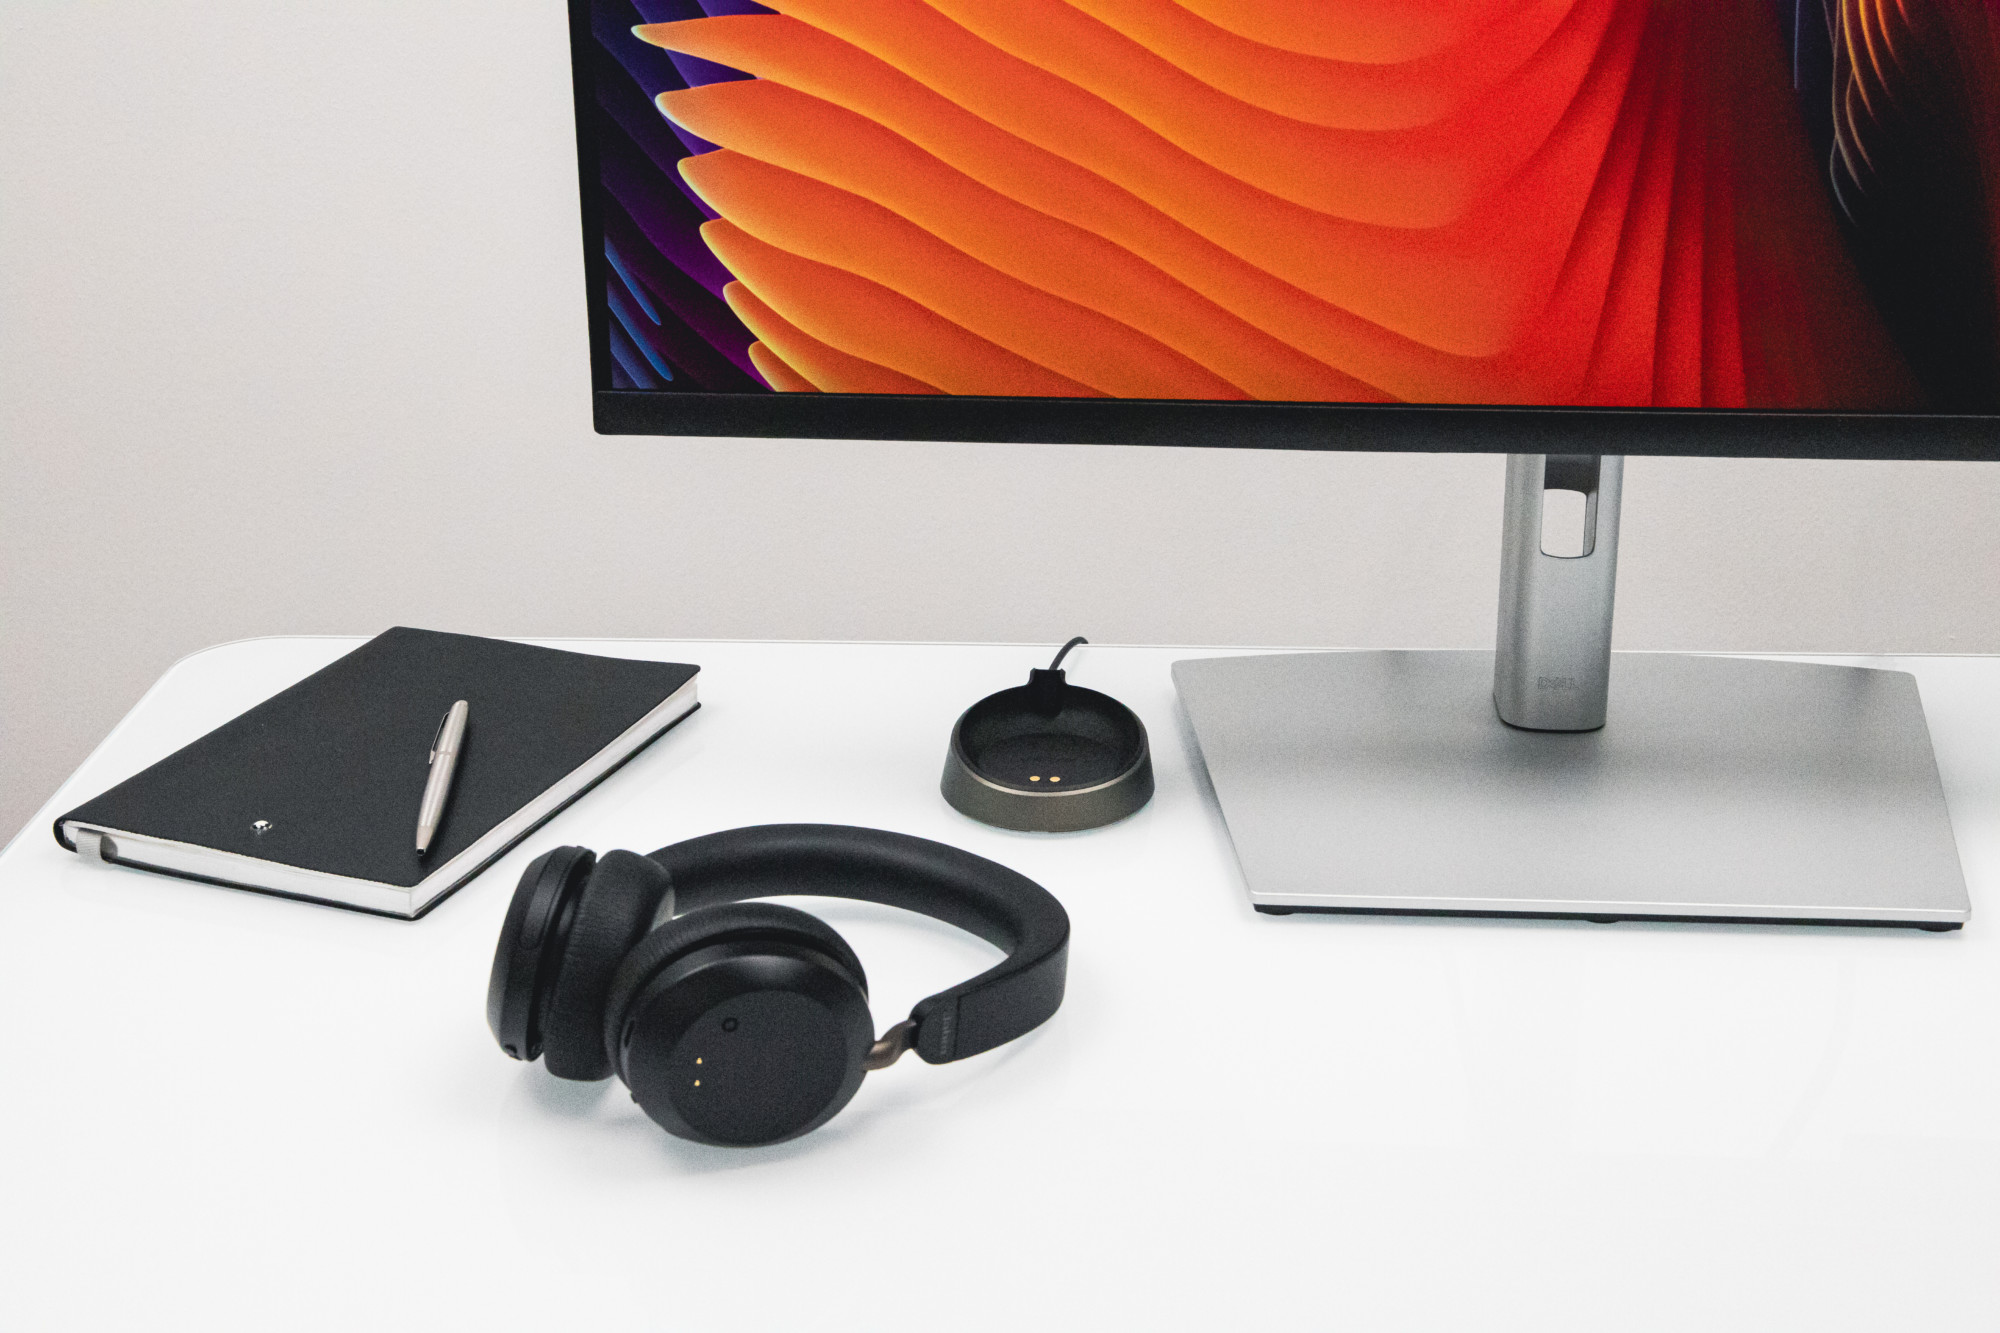 Complete your urban home office setup with wireless headphones.